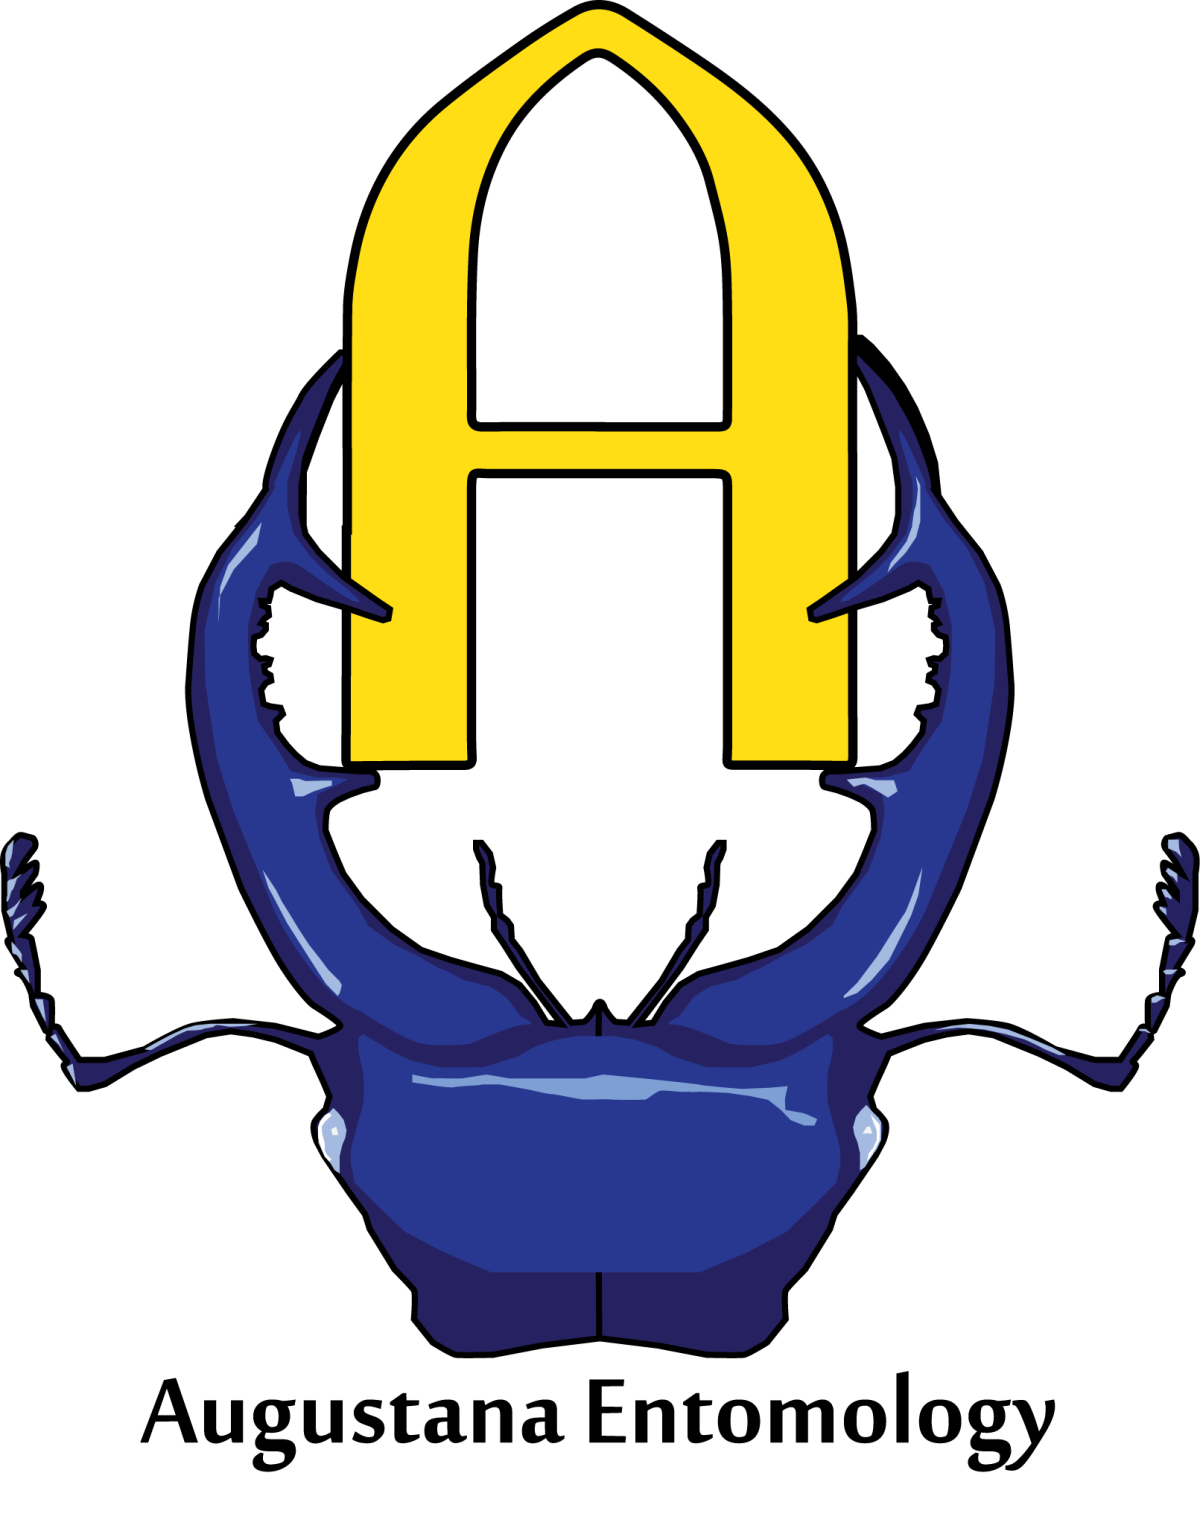 Pincher-type beetle holding the Augustana A logo with its pinchers